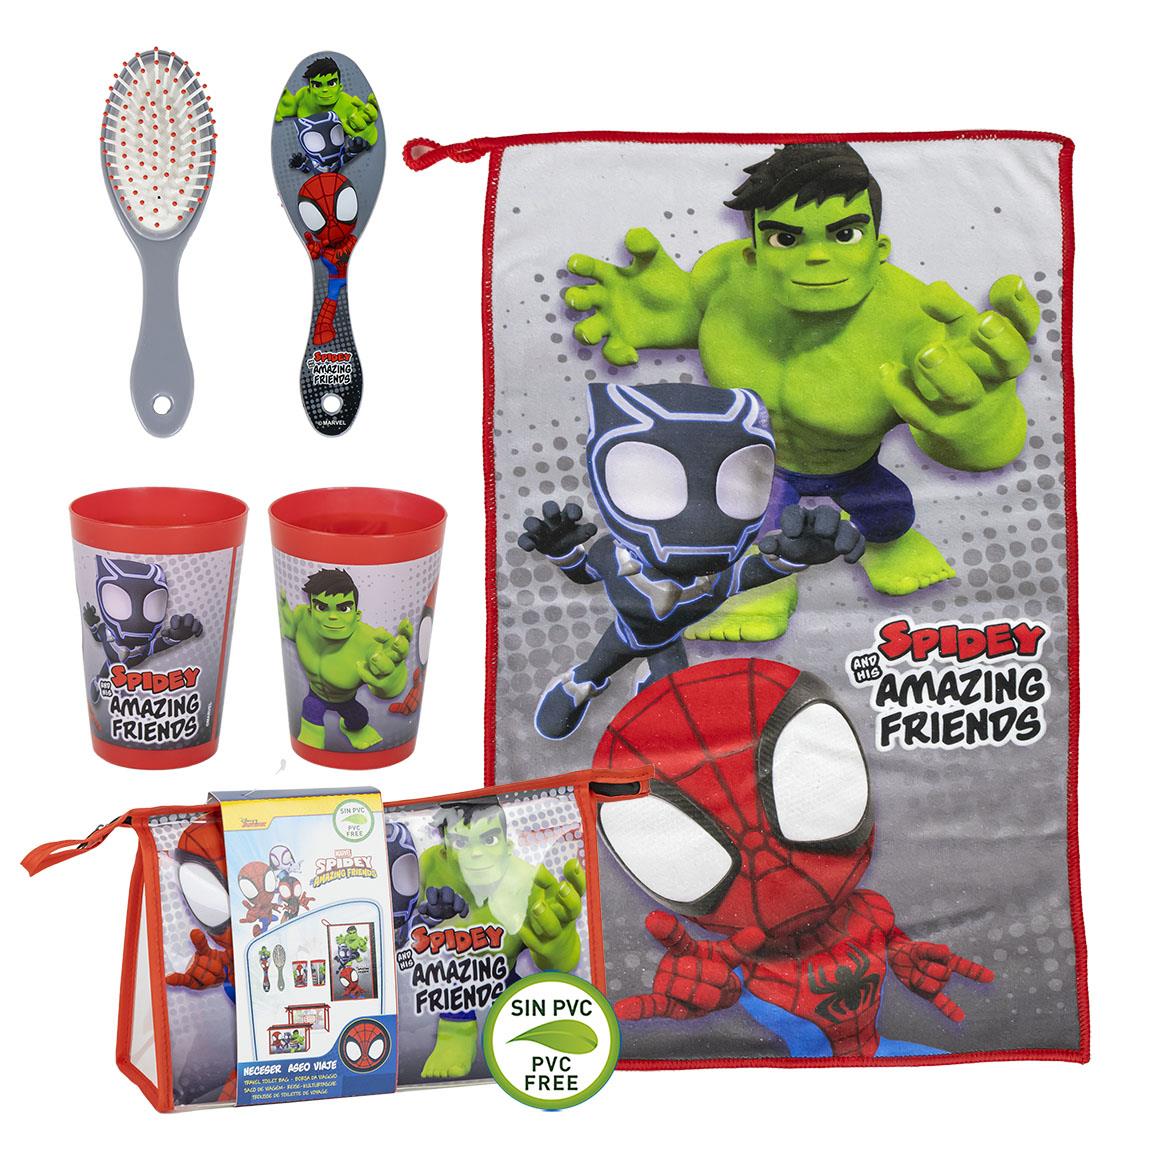 TOILETRY BAG TOILETBAG ACCESSORIES SPIDEY